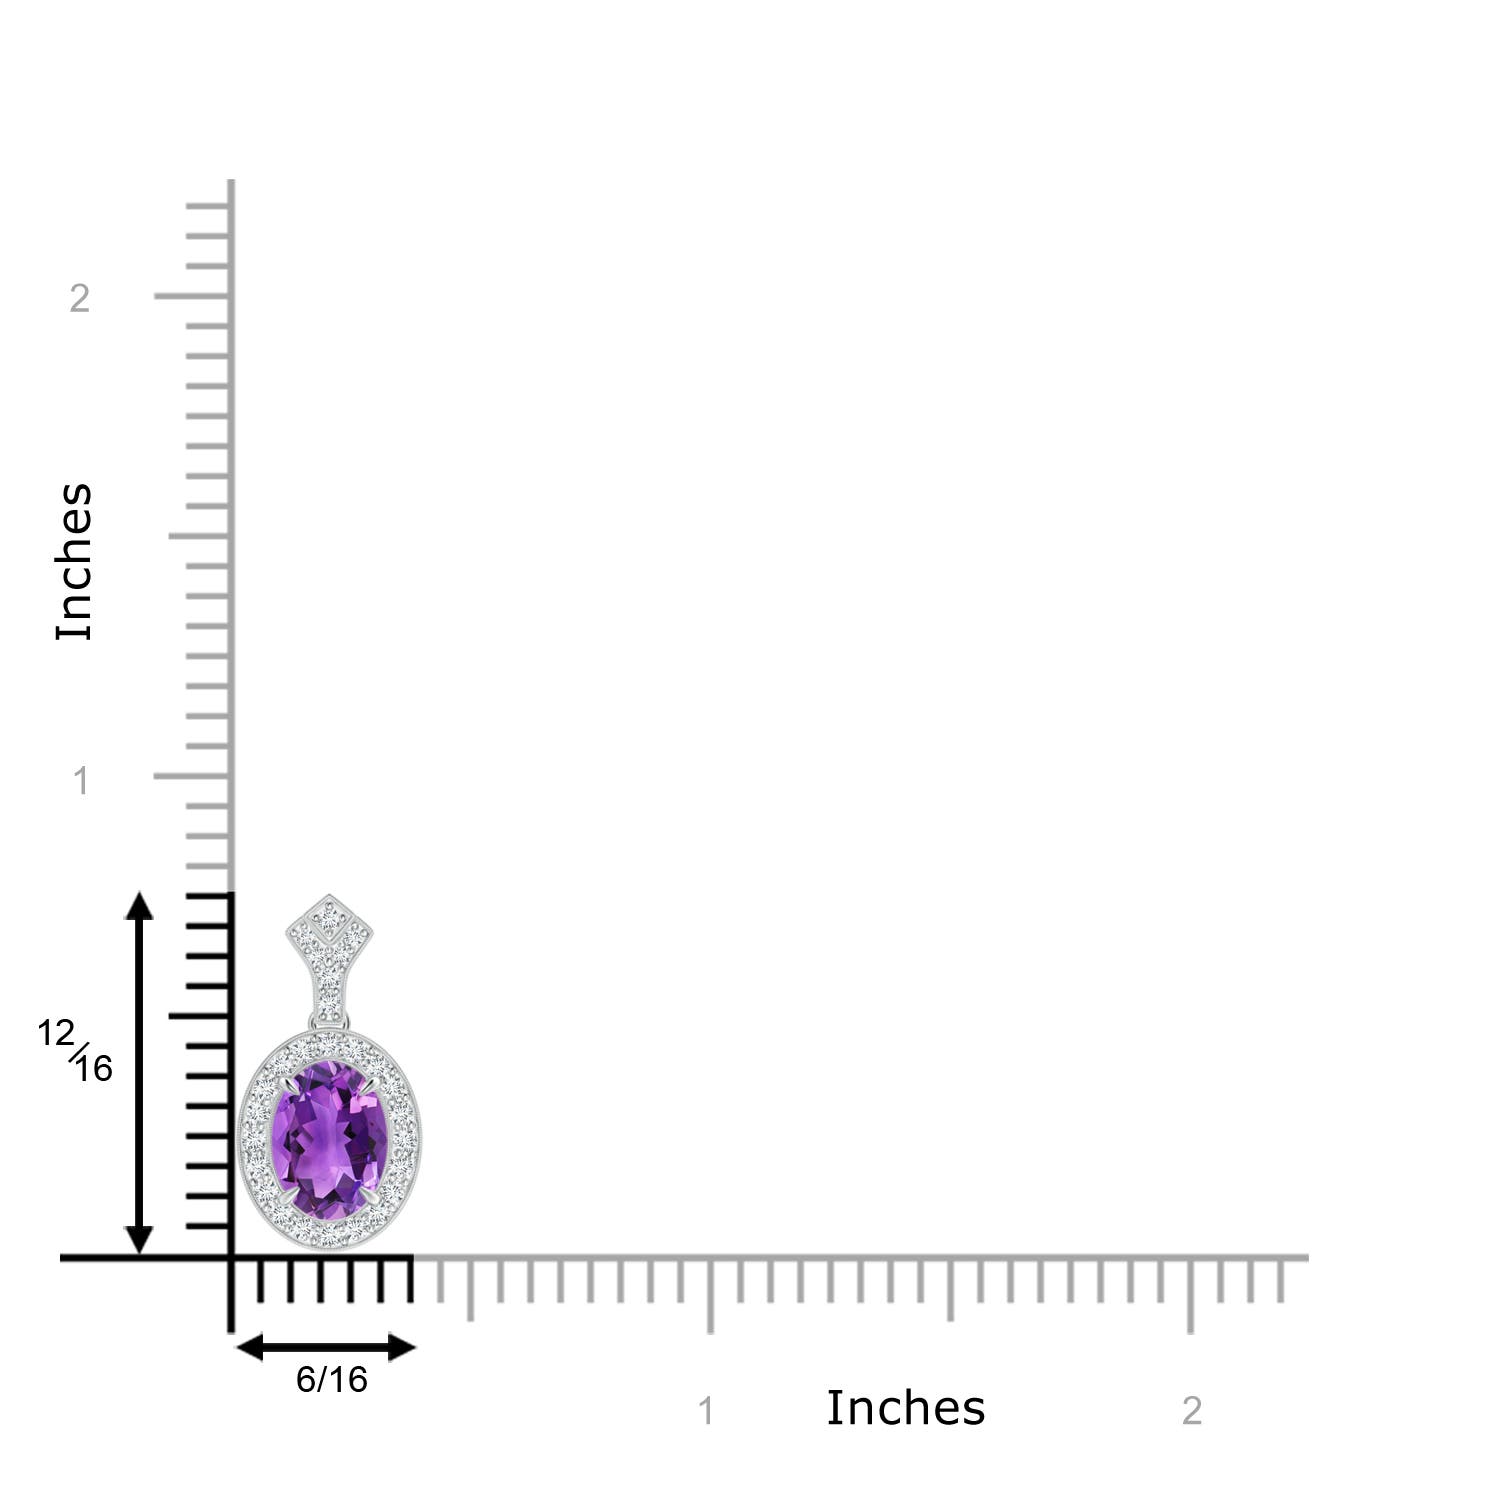 AAA - Amethyst / 1.79 CT / 14 KT White Gold